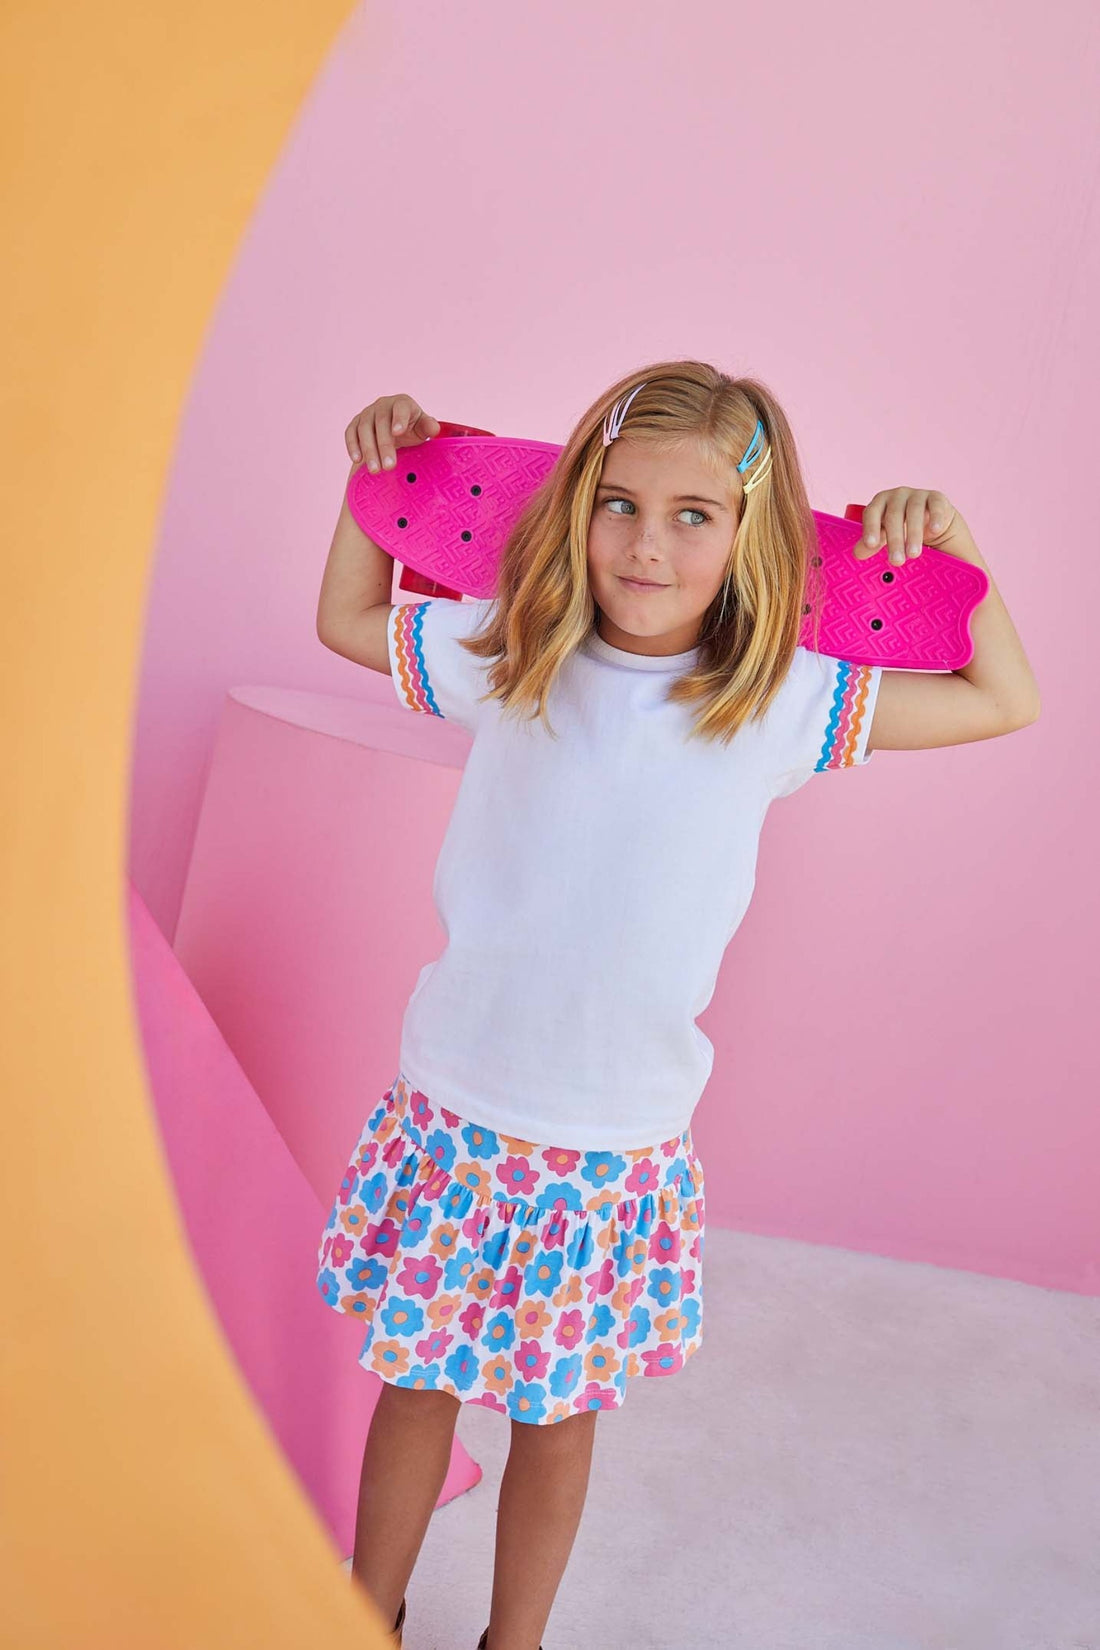 Our model is holding a skateboard behind her head and wearing our Ric Rac essential tee which features three layers of ric rac detailing on the short sleeves in bright blue, pink, and orange. 